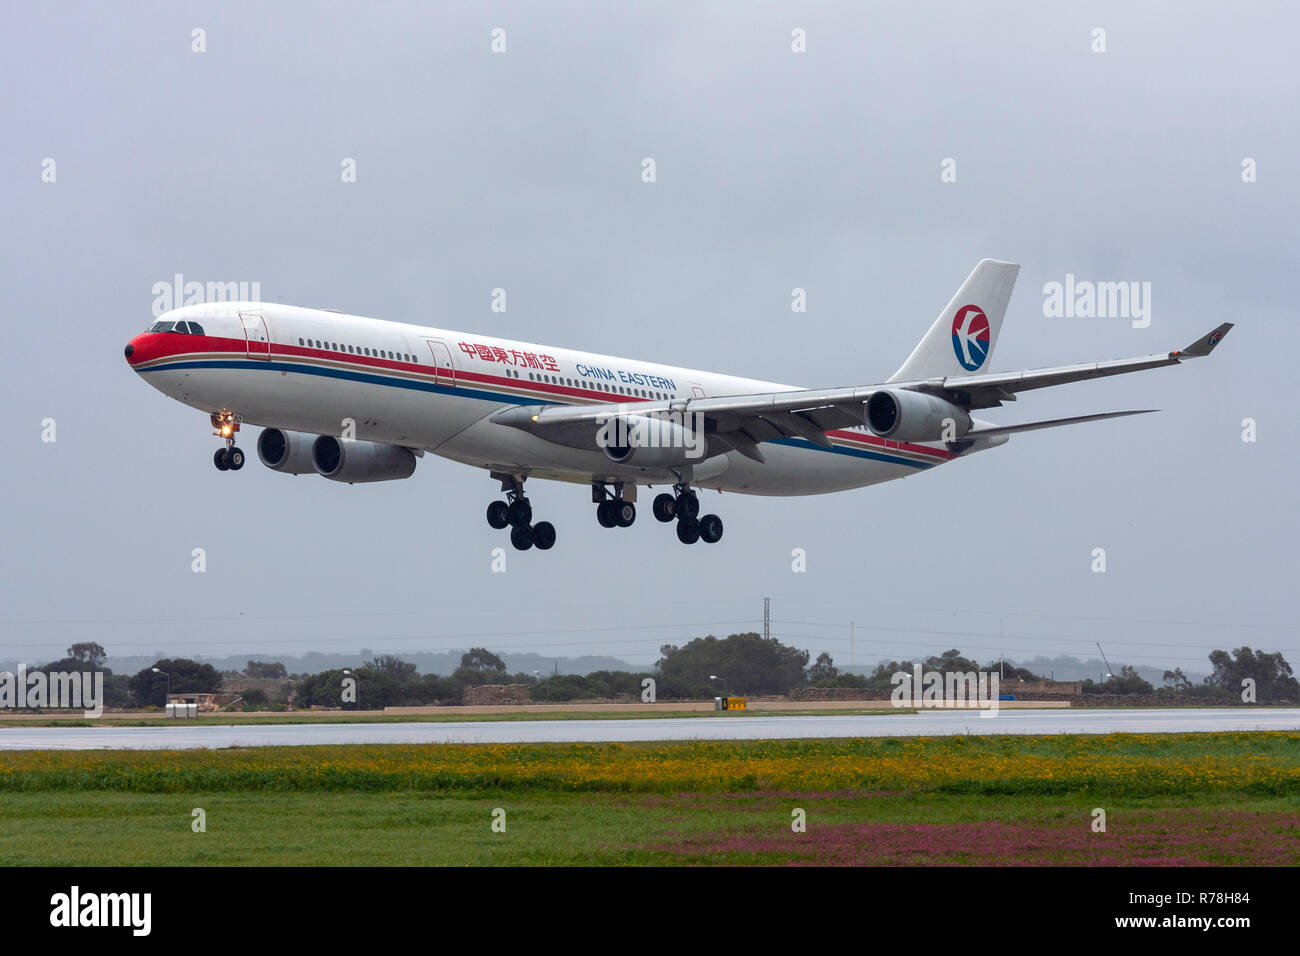 China Eastern Airlines Airbus A340-313 arriving from China to take back Chinese citizens back to China from Libya. Stock Photo